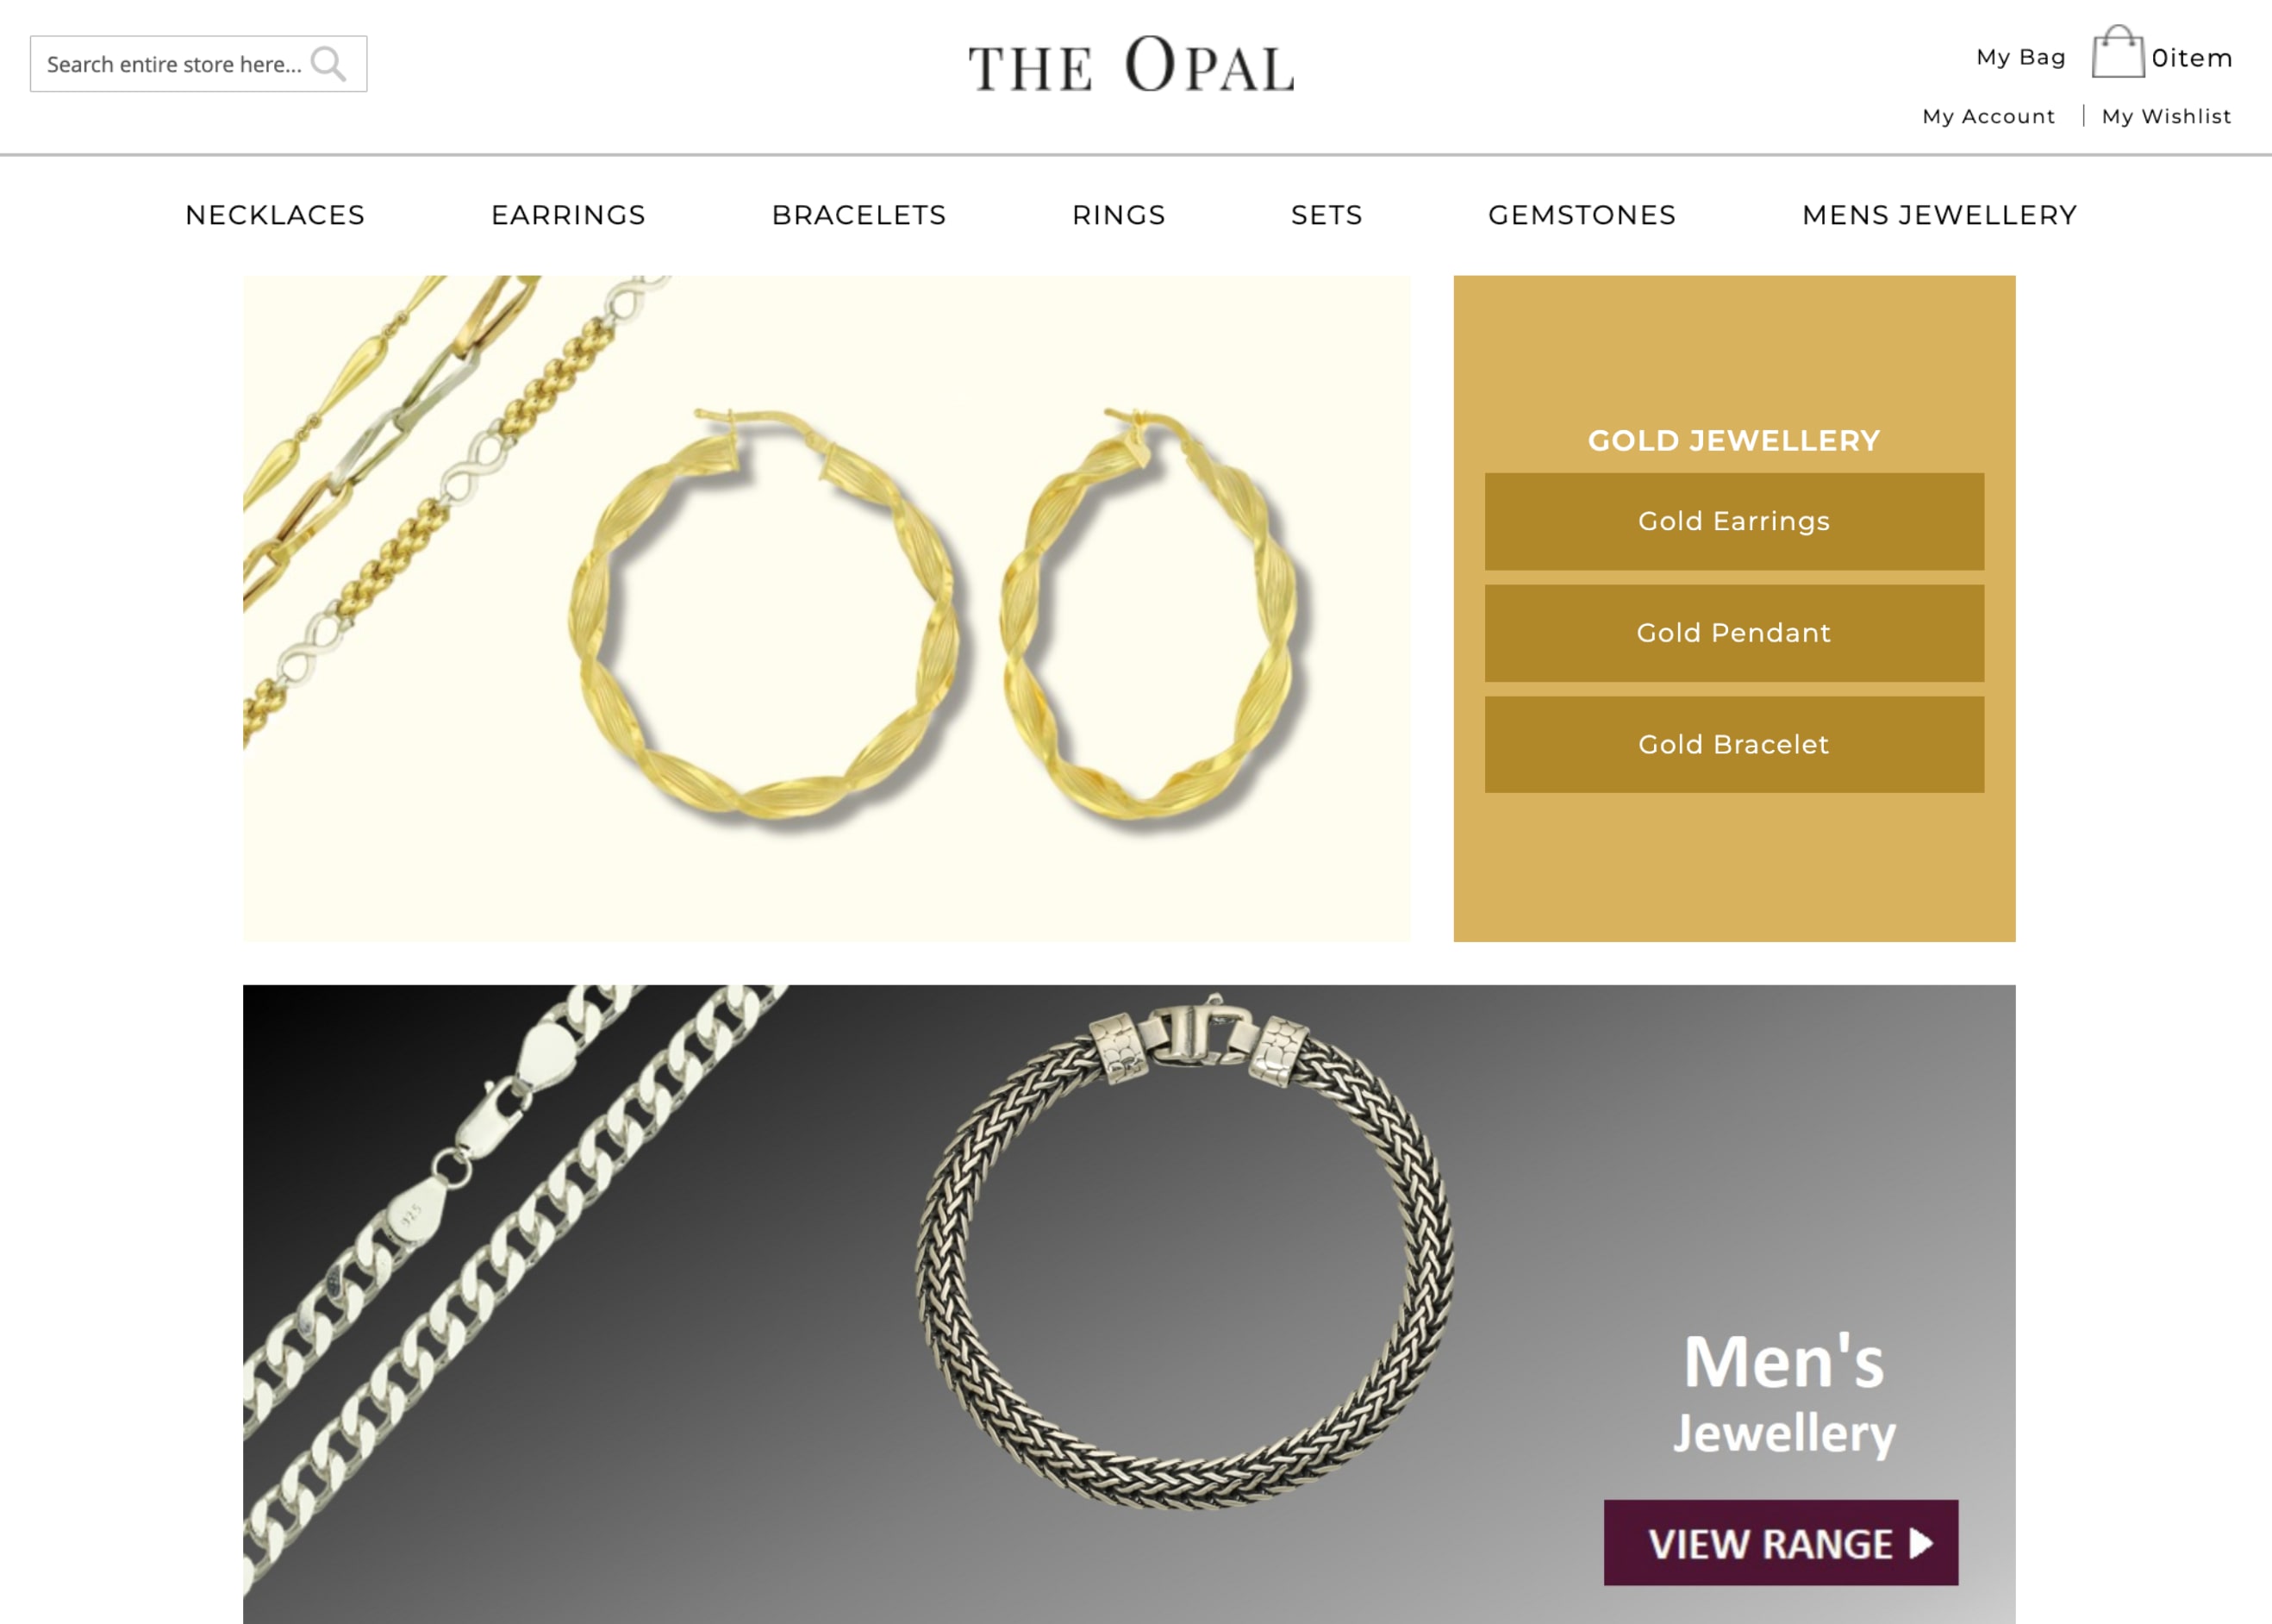 The Opal sells a variety of related products—from necklaces to bracelets to men’s jewelry. 